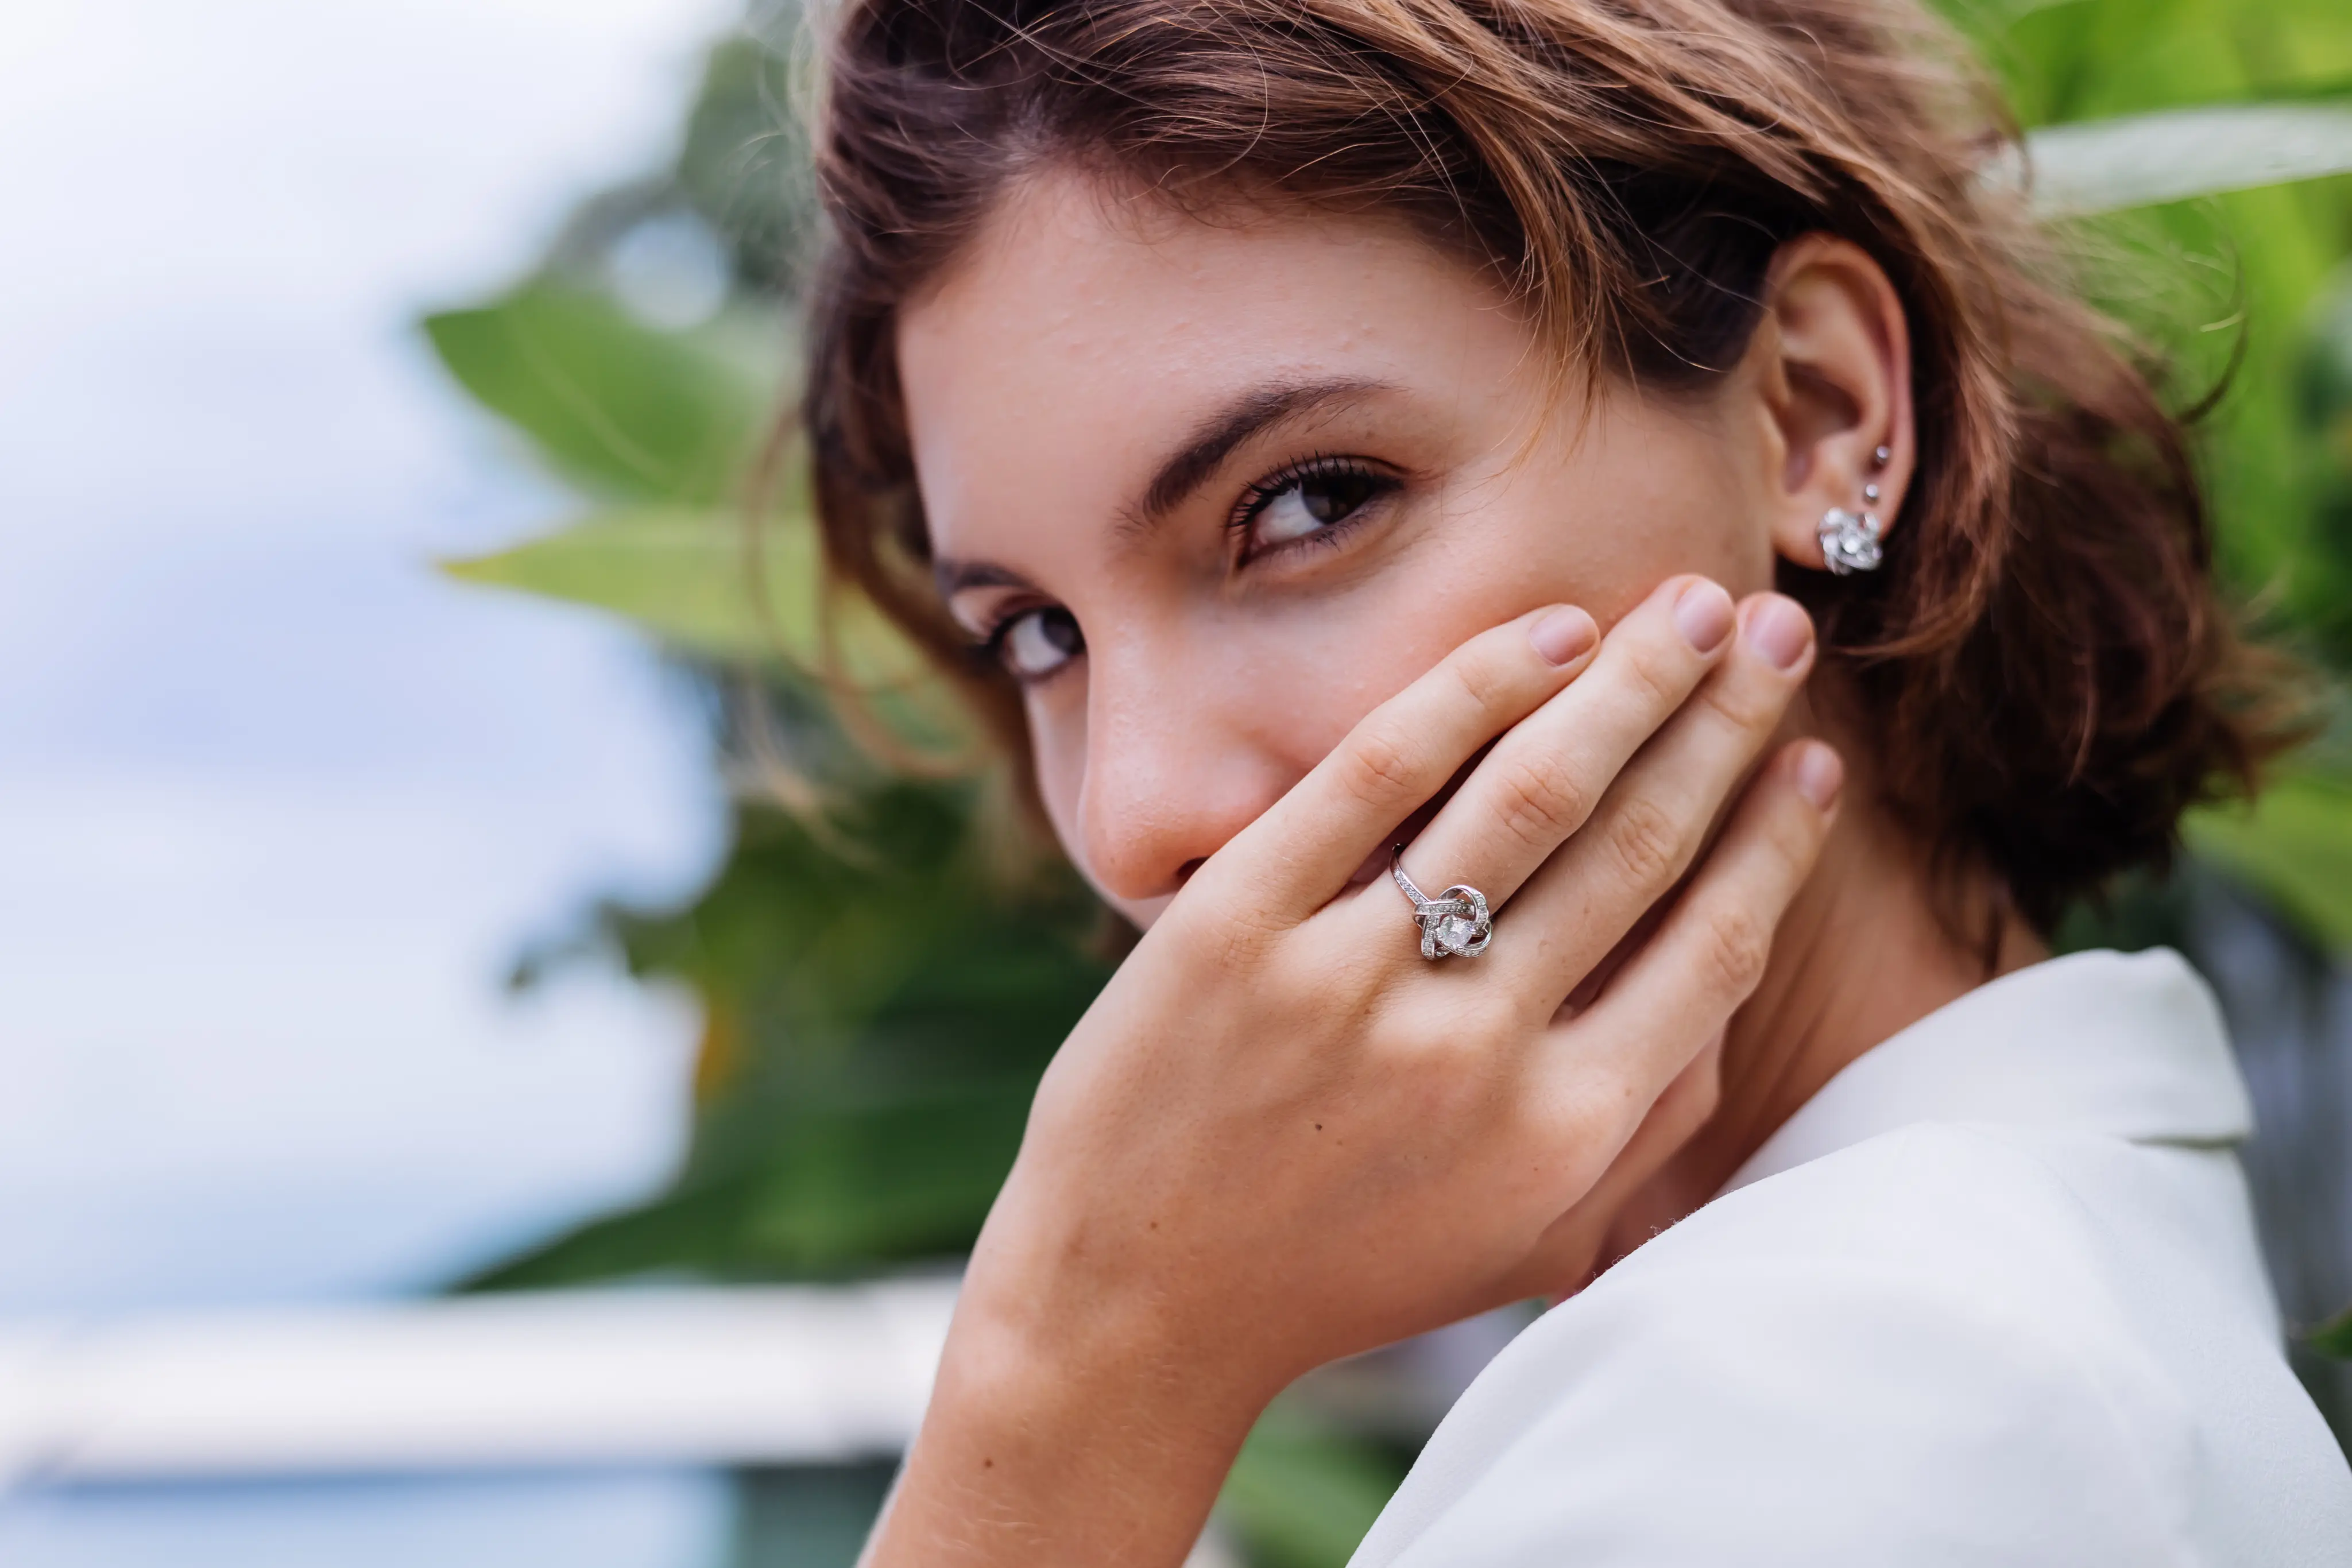 Young woman wearing a diamond ring and earrings with a thoughtful expression